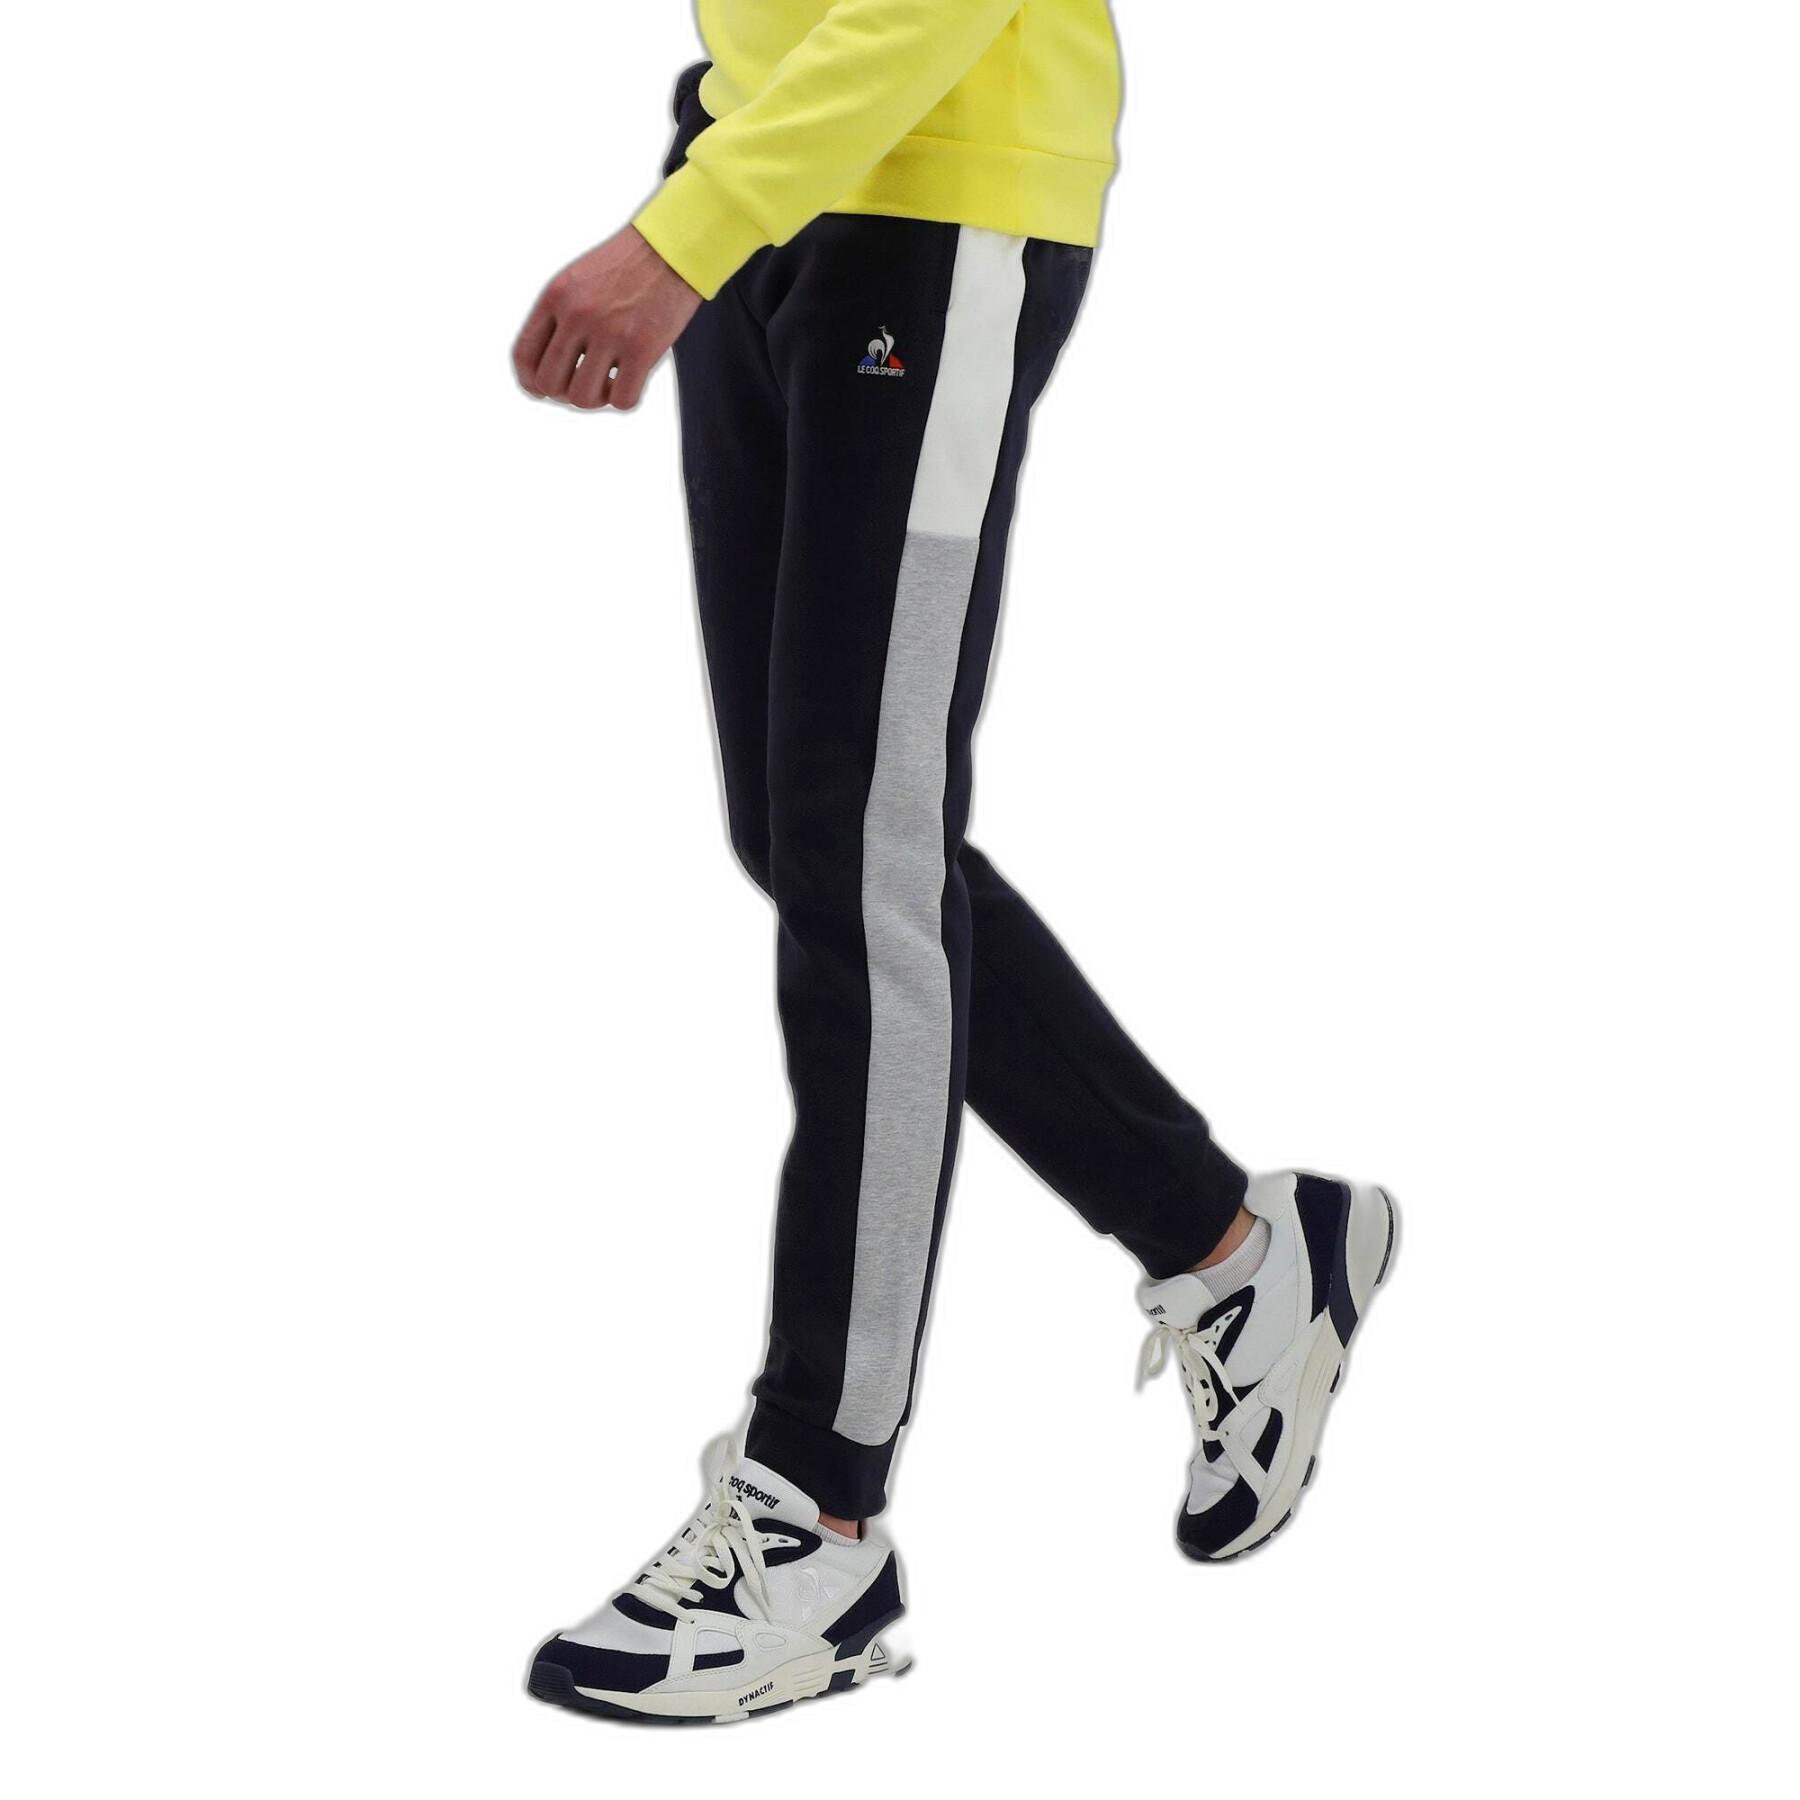 have Sult Bliv oppe Fitted jogging suit Le Coq Sportif Saison 2 N°1 - Pants - Men's volleyball  wear - Volleyball wear